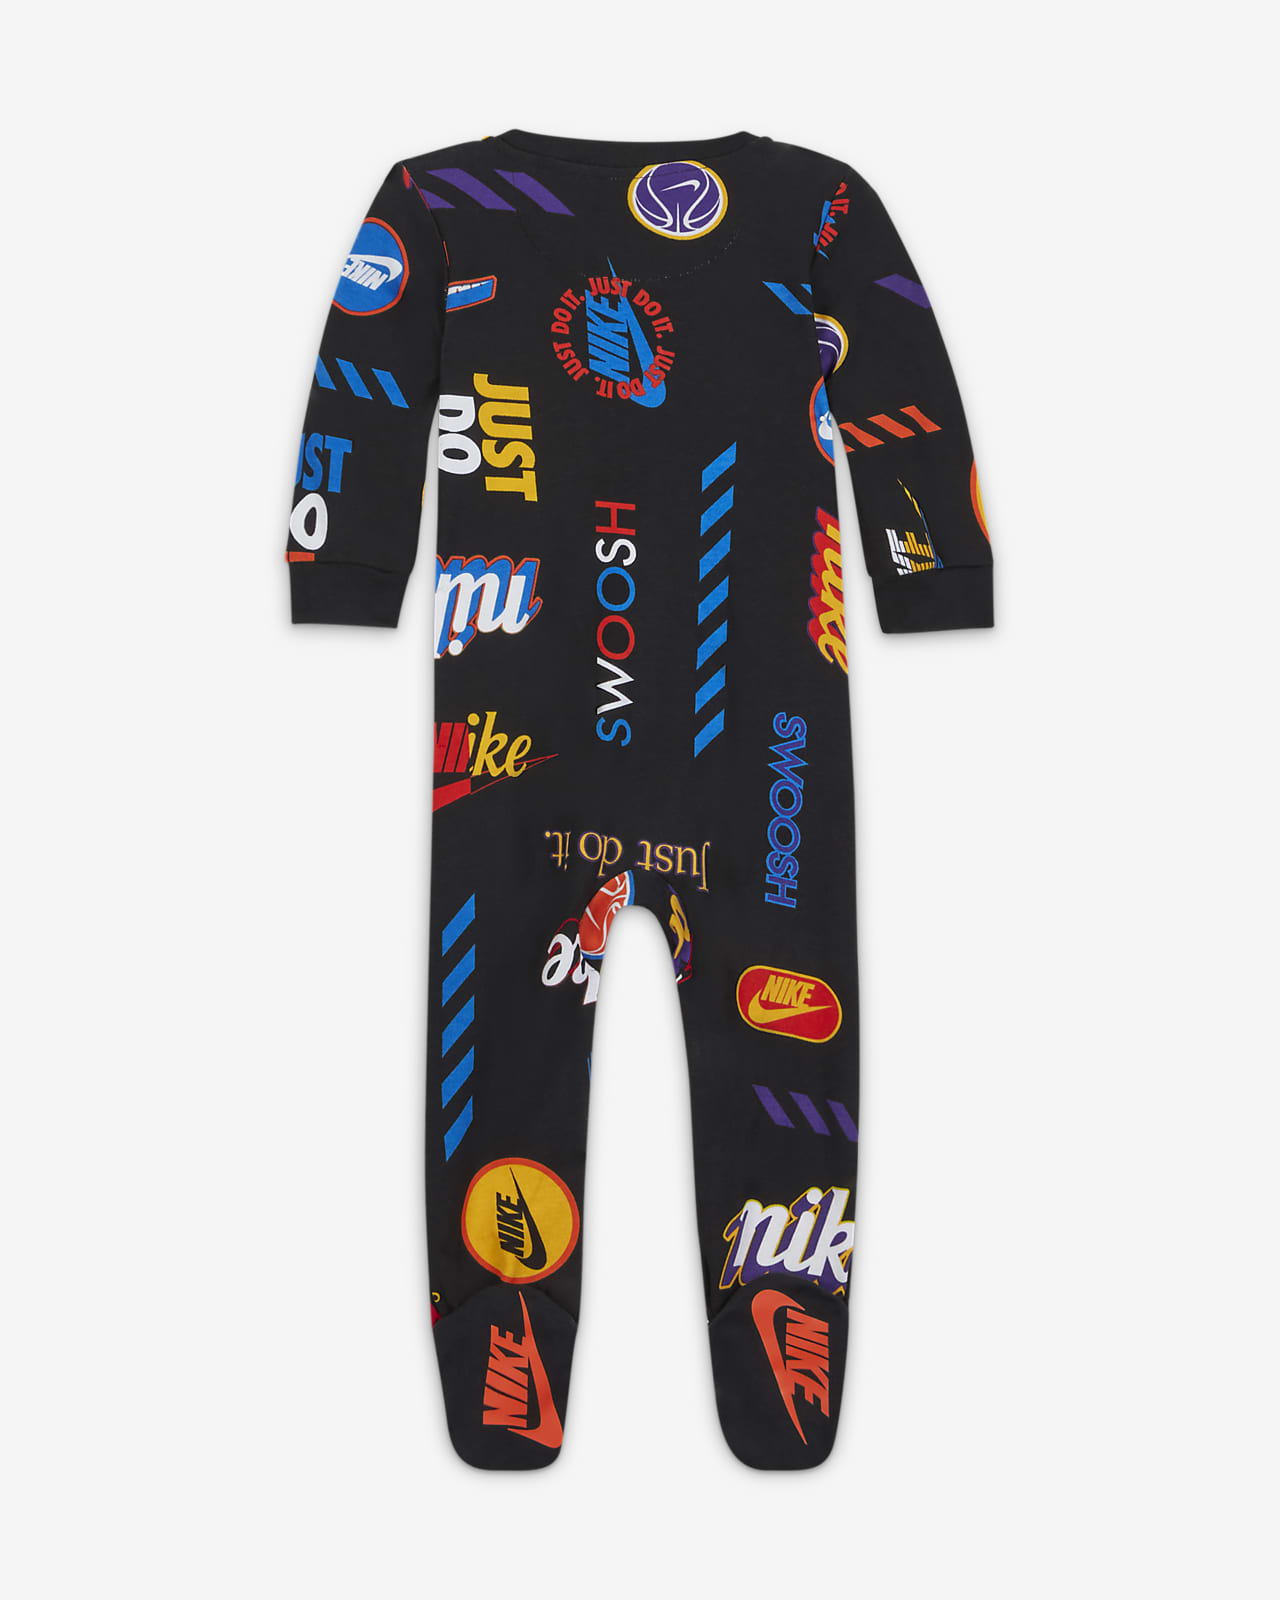 Nike Baby (0-9M) Footed Full-Zip Coverall.